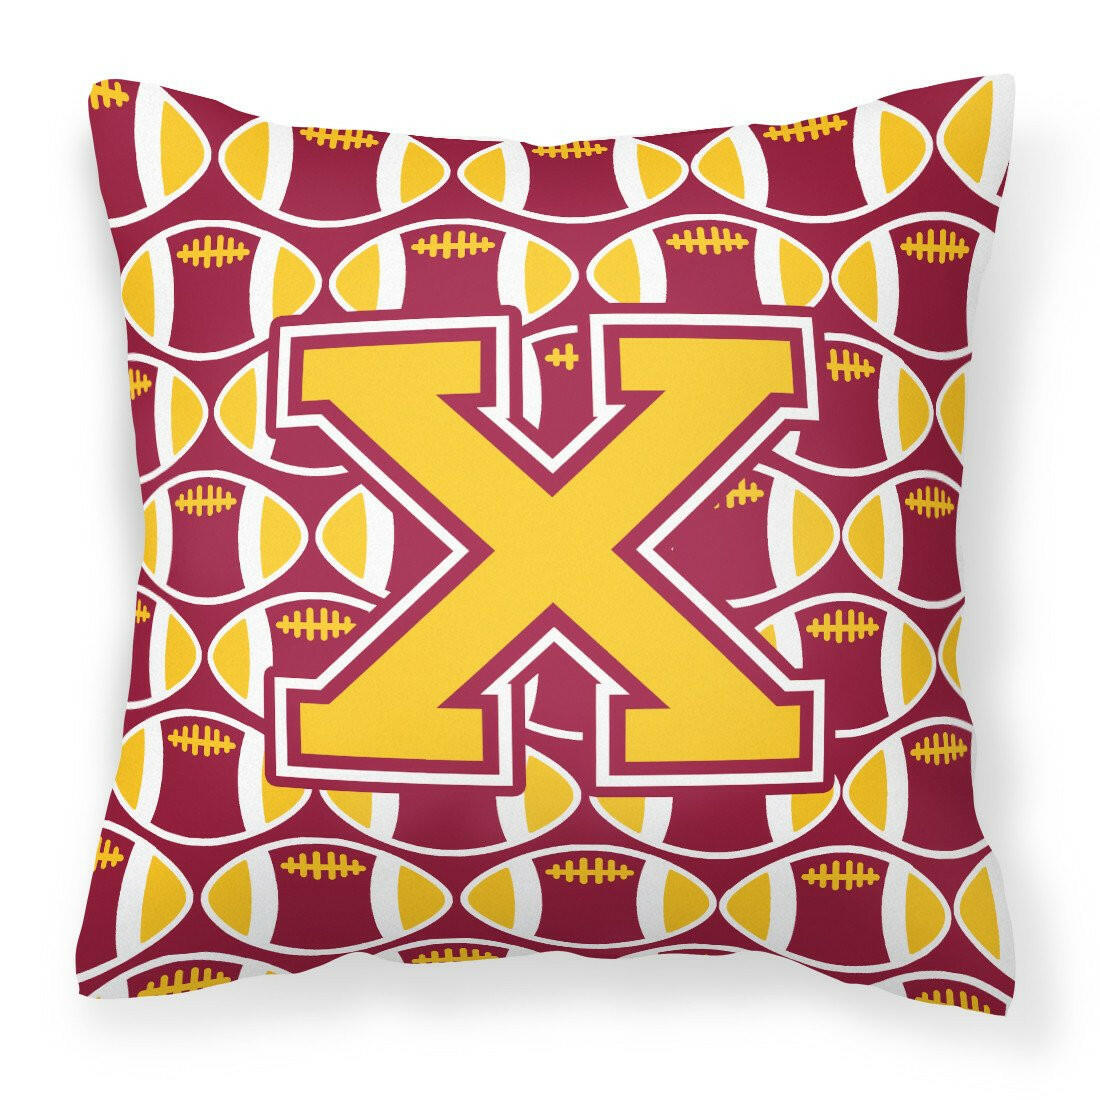 Letter X Football Maroon and Gold Fabric Decorative Pillow CJ1081-XPW1414 by Caroline's Treasures